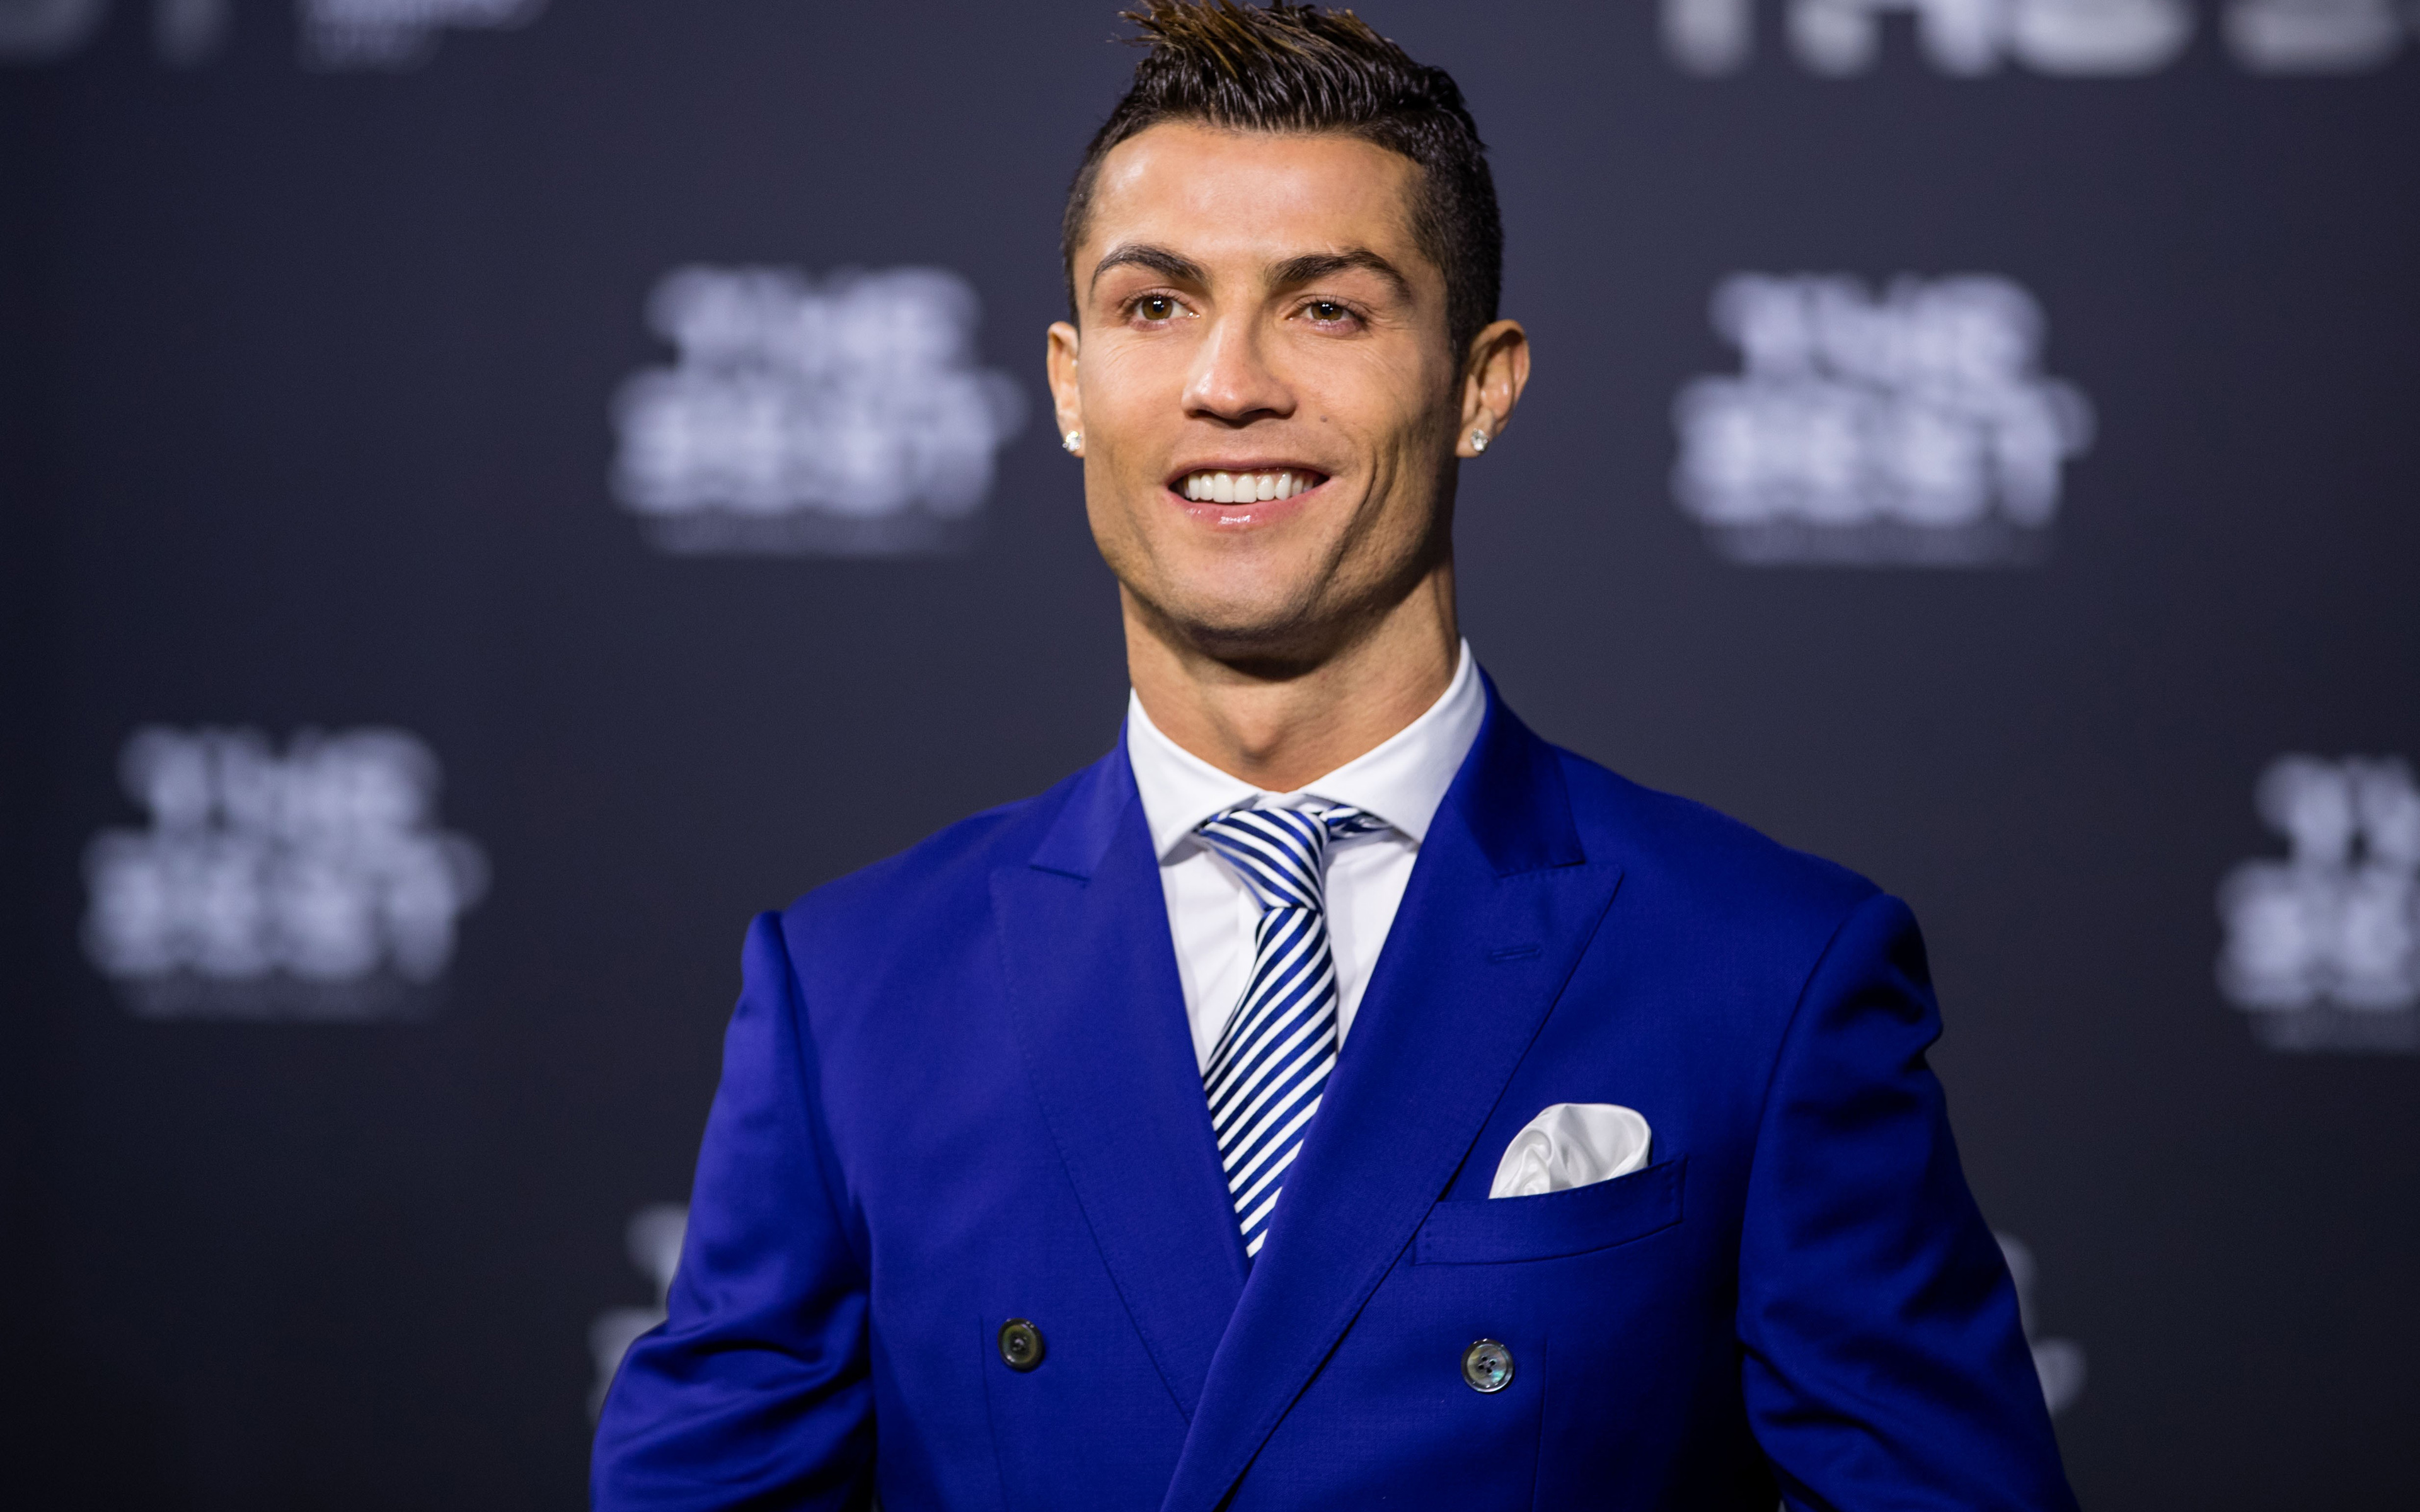 Download Wallpapers K Cristiano Ronaldo Football Stars Blue Suit CR Real Madrid Soccer